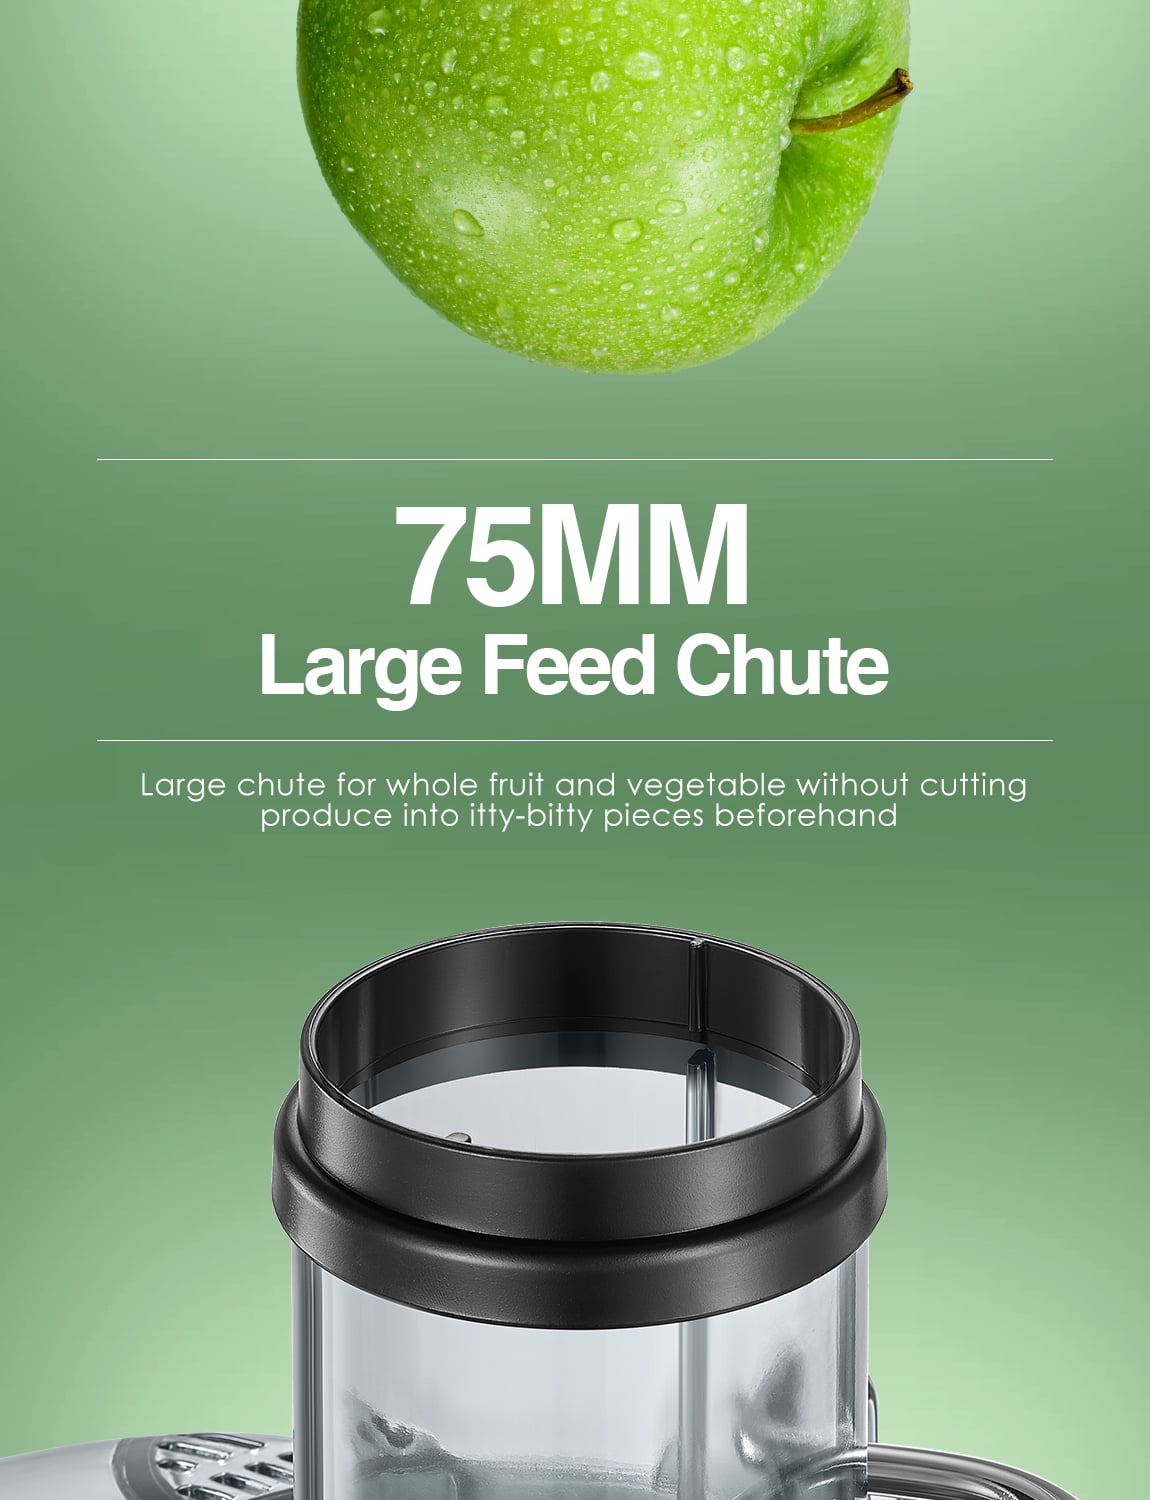 Juicer Machines, FOHERE 1000W Juicer Whole Fruit and Vegetables, Quick  Juicing Easy to Clean, 75MM Large Feed Chute, Dual Speed Setting and  Non-Slip